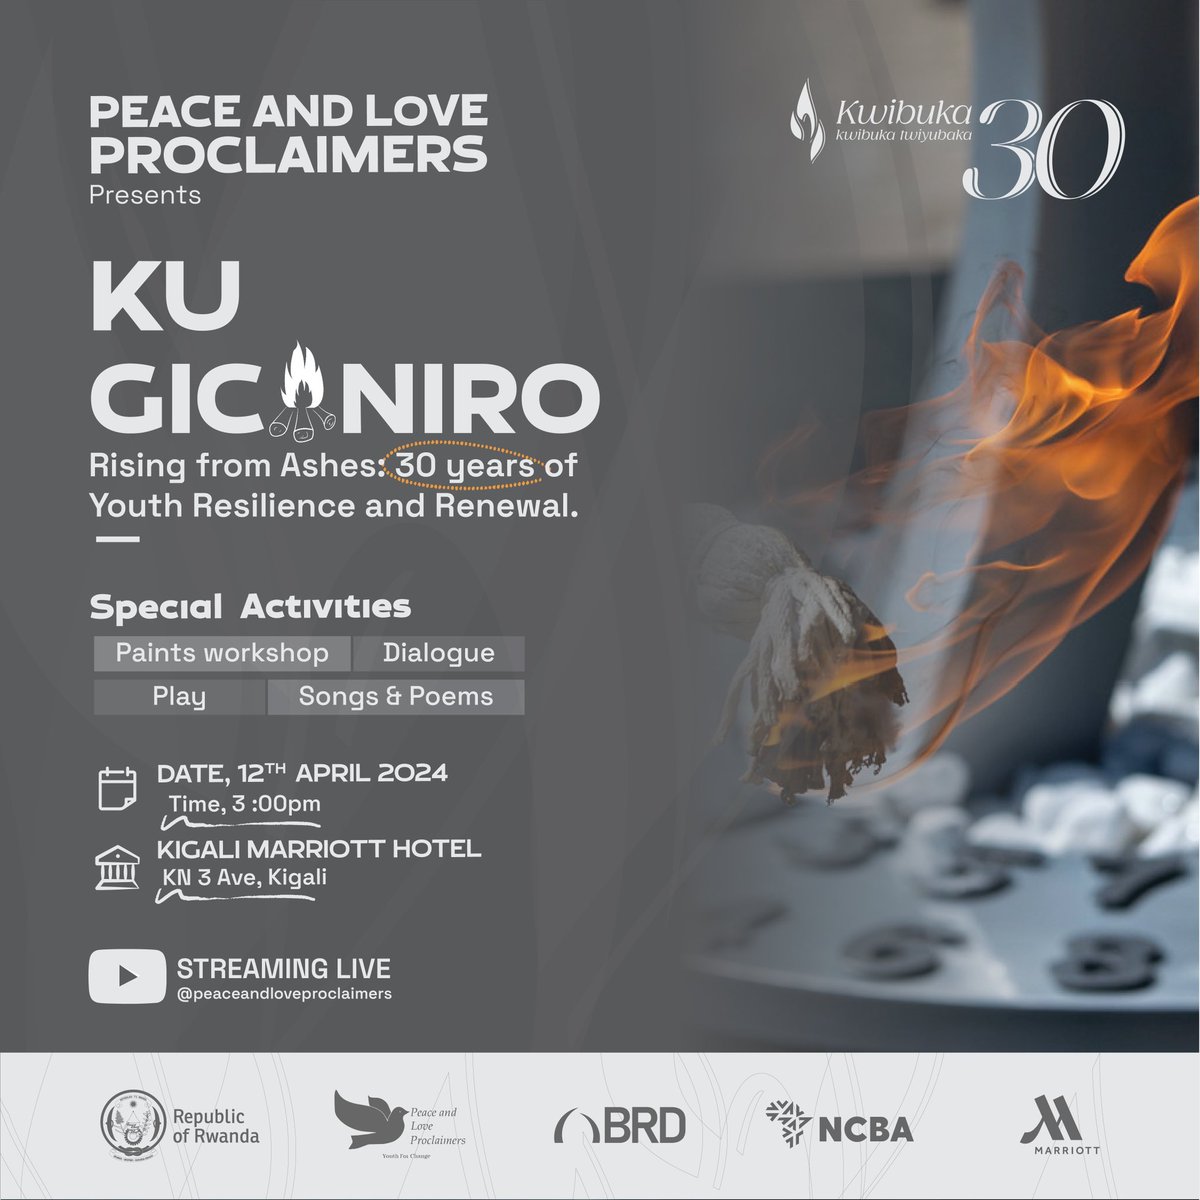 Join us at #KuGicaniro2024 under the Theme: “Rising from Ashes: 30 years of Youth Resilience and Renewal” We will discuss the journey of preserving historical memory among youth and ensuring remembrance for generations. ⏱️: 3 PM 🗓️: April 12, 2024 📍: Kigali Marriott Hotel